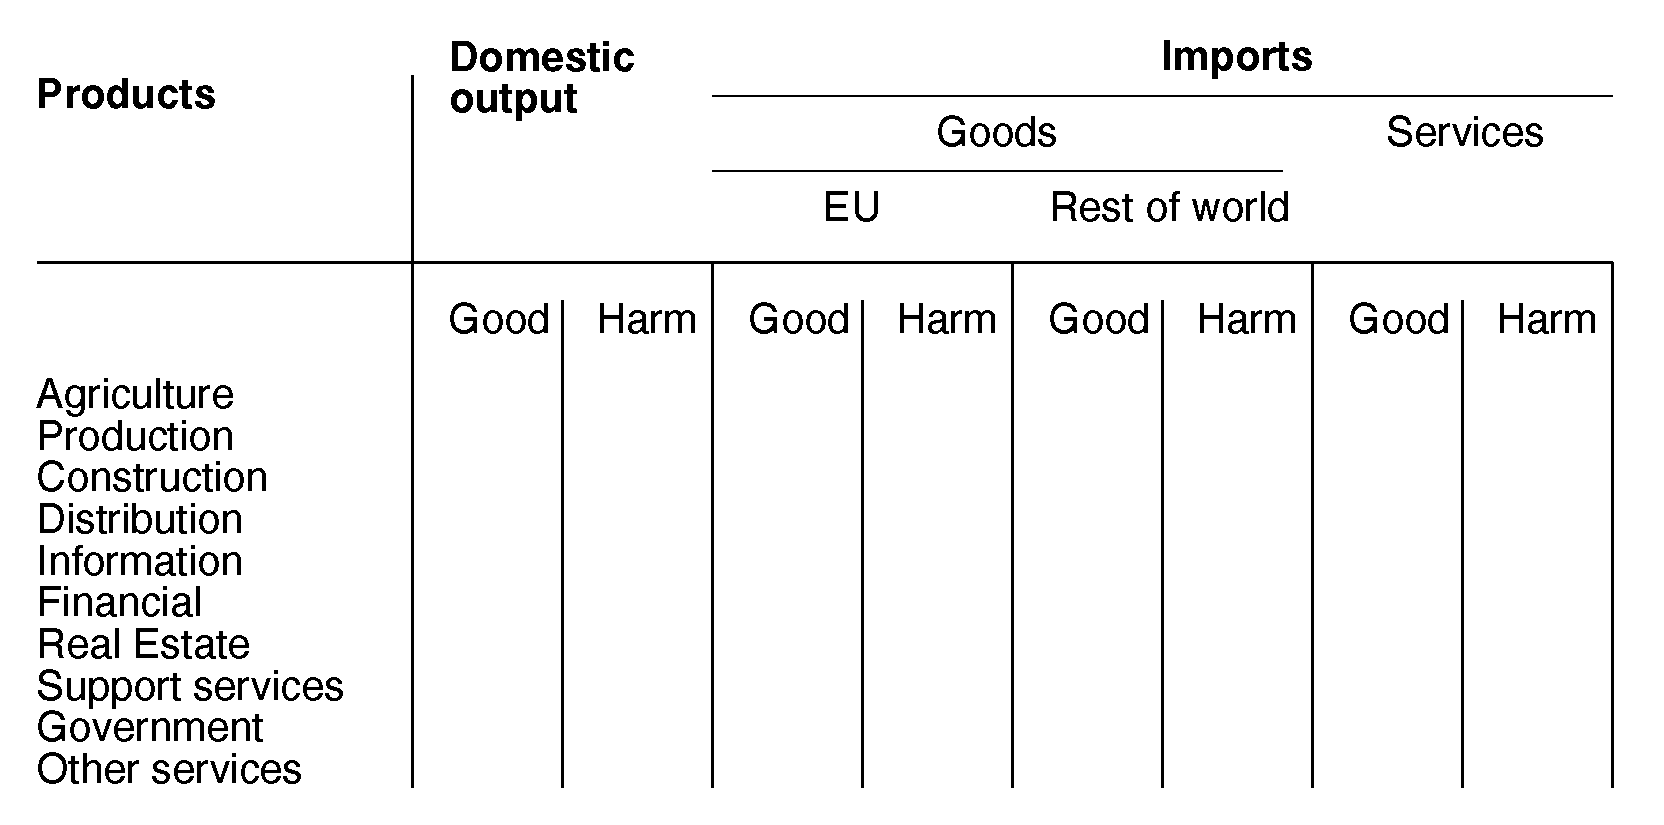 Example of Supply and Use Table showing Good and Harm 1664,825